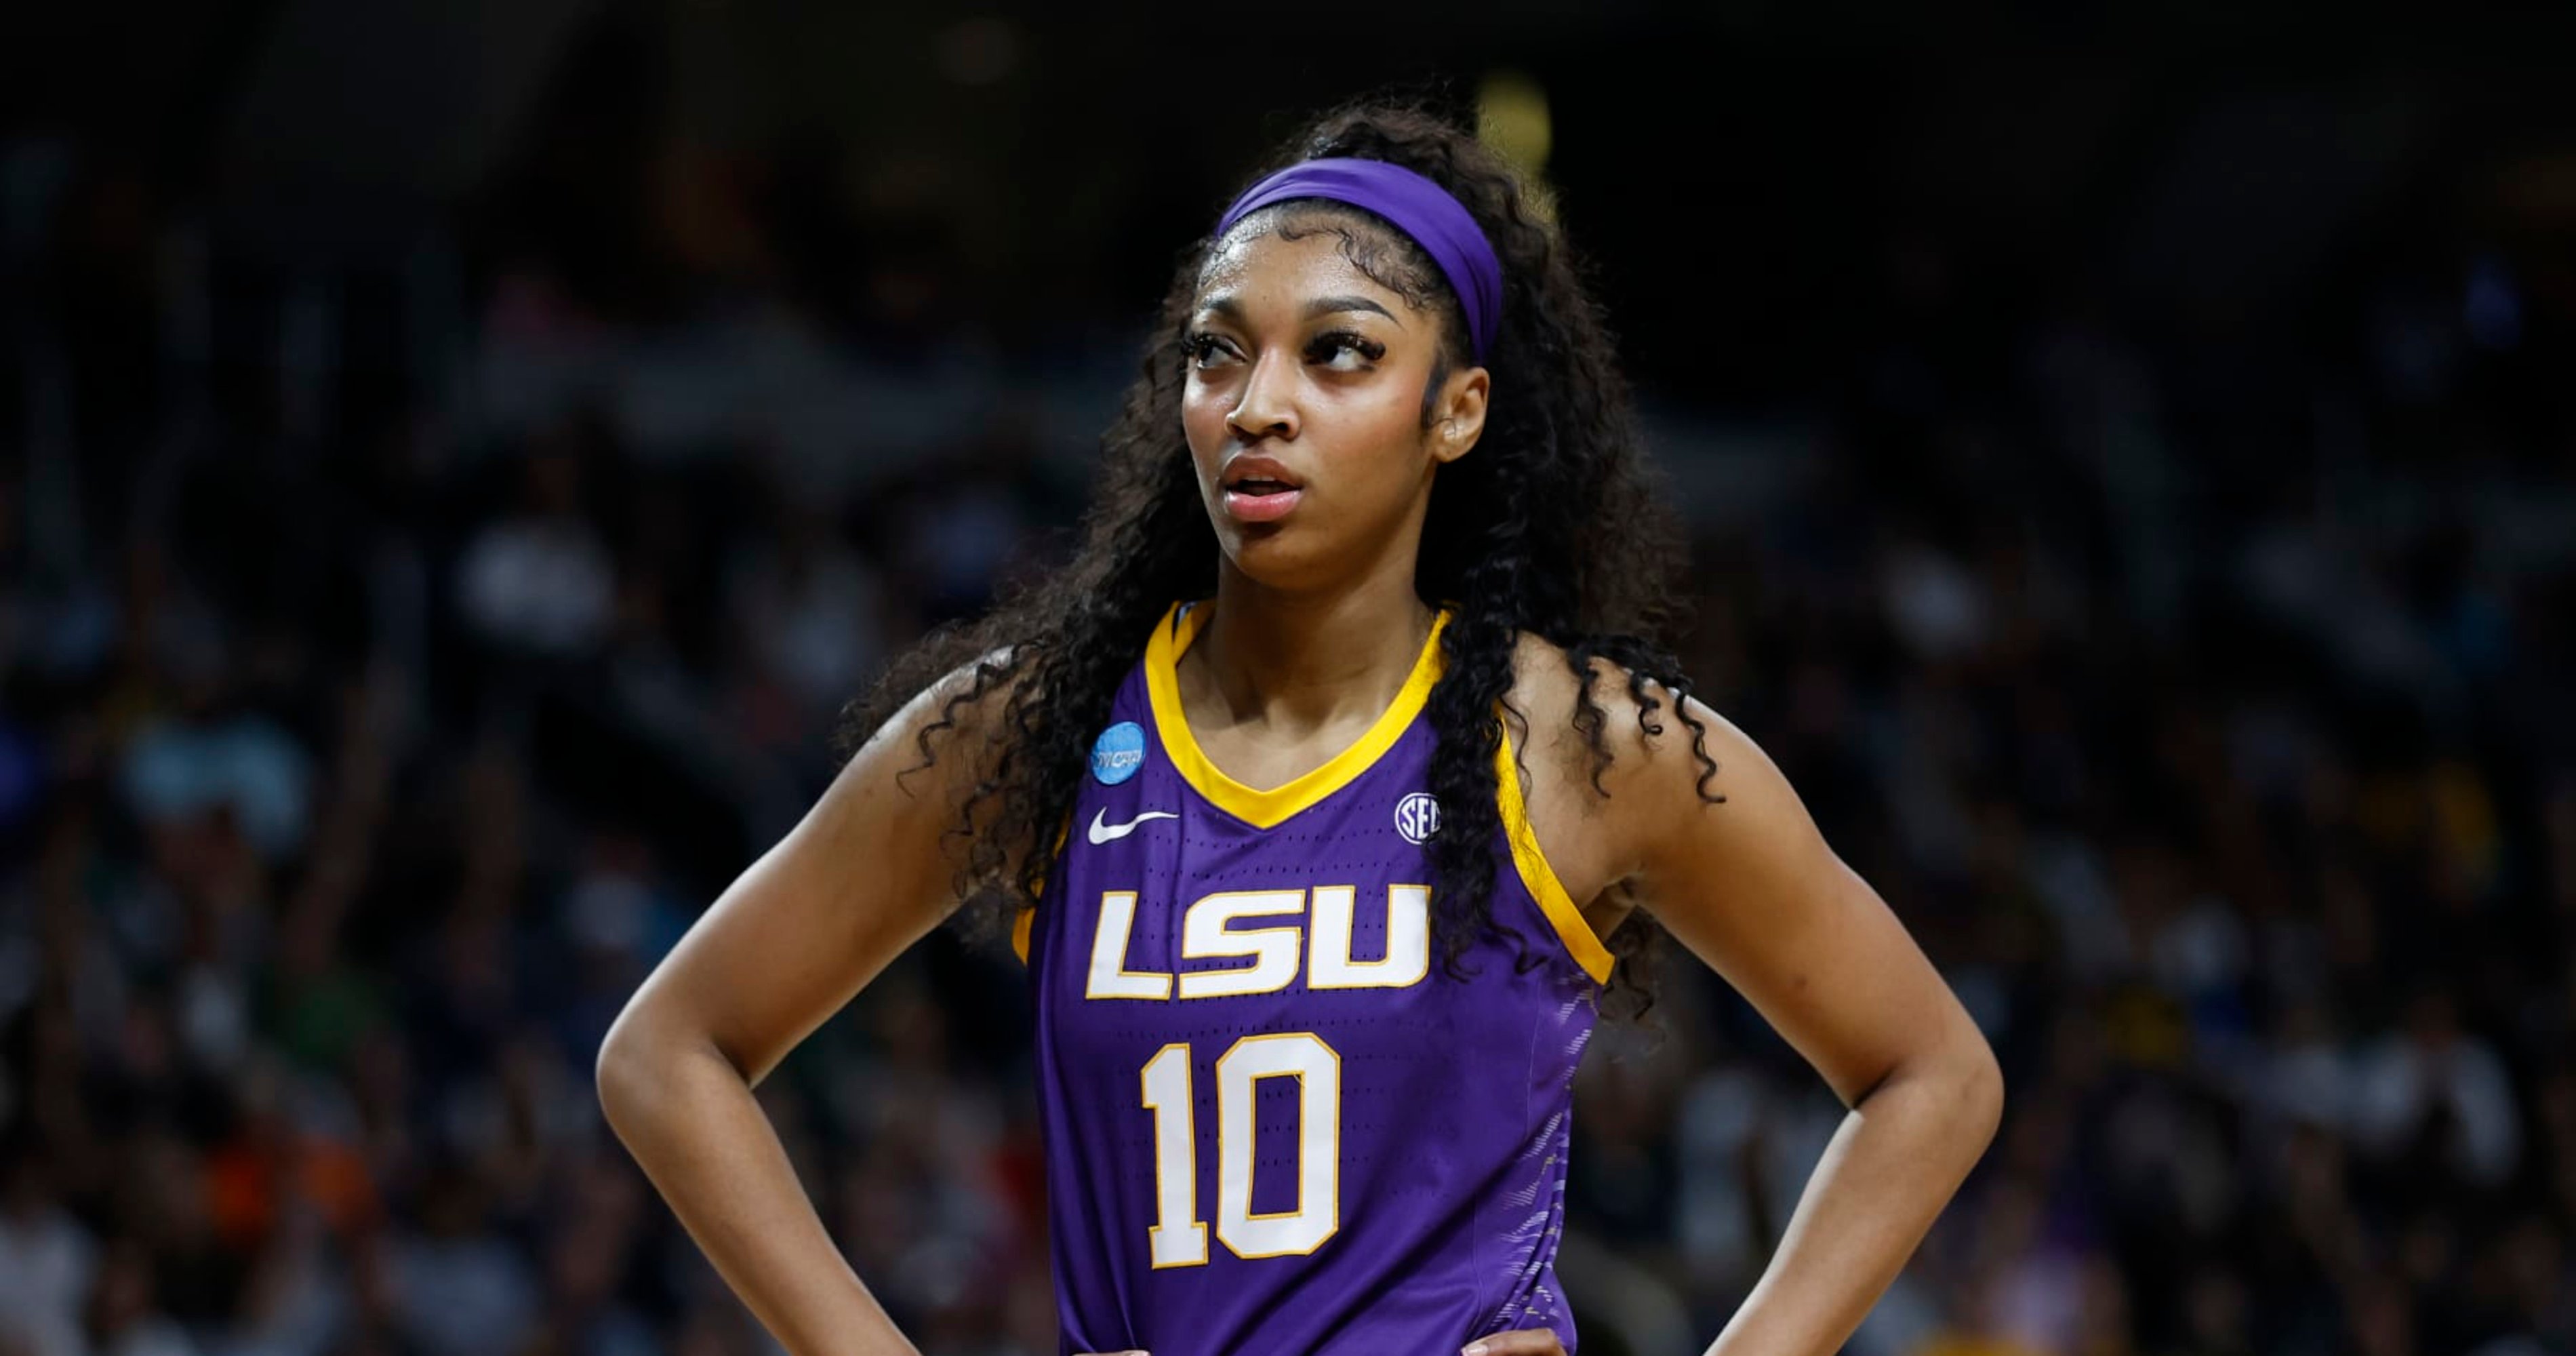 LSU's Angel Reese Says She Got Death Threats, Was Sexualized Since National Title Win